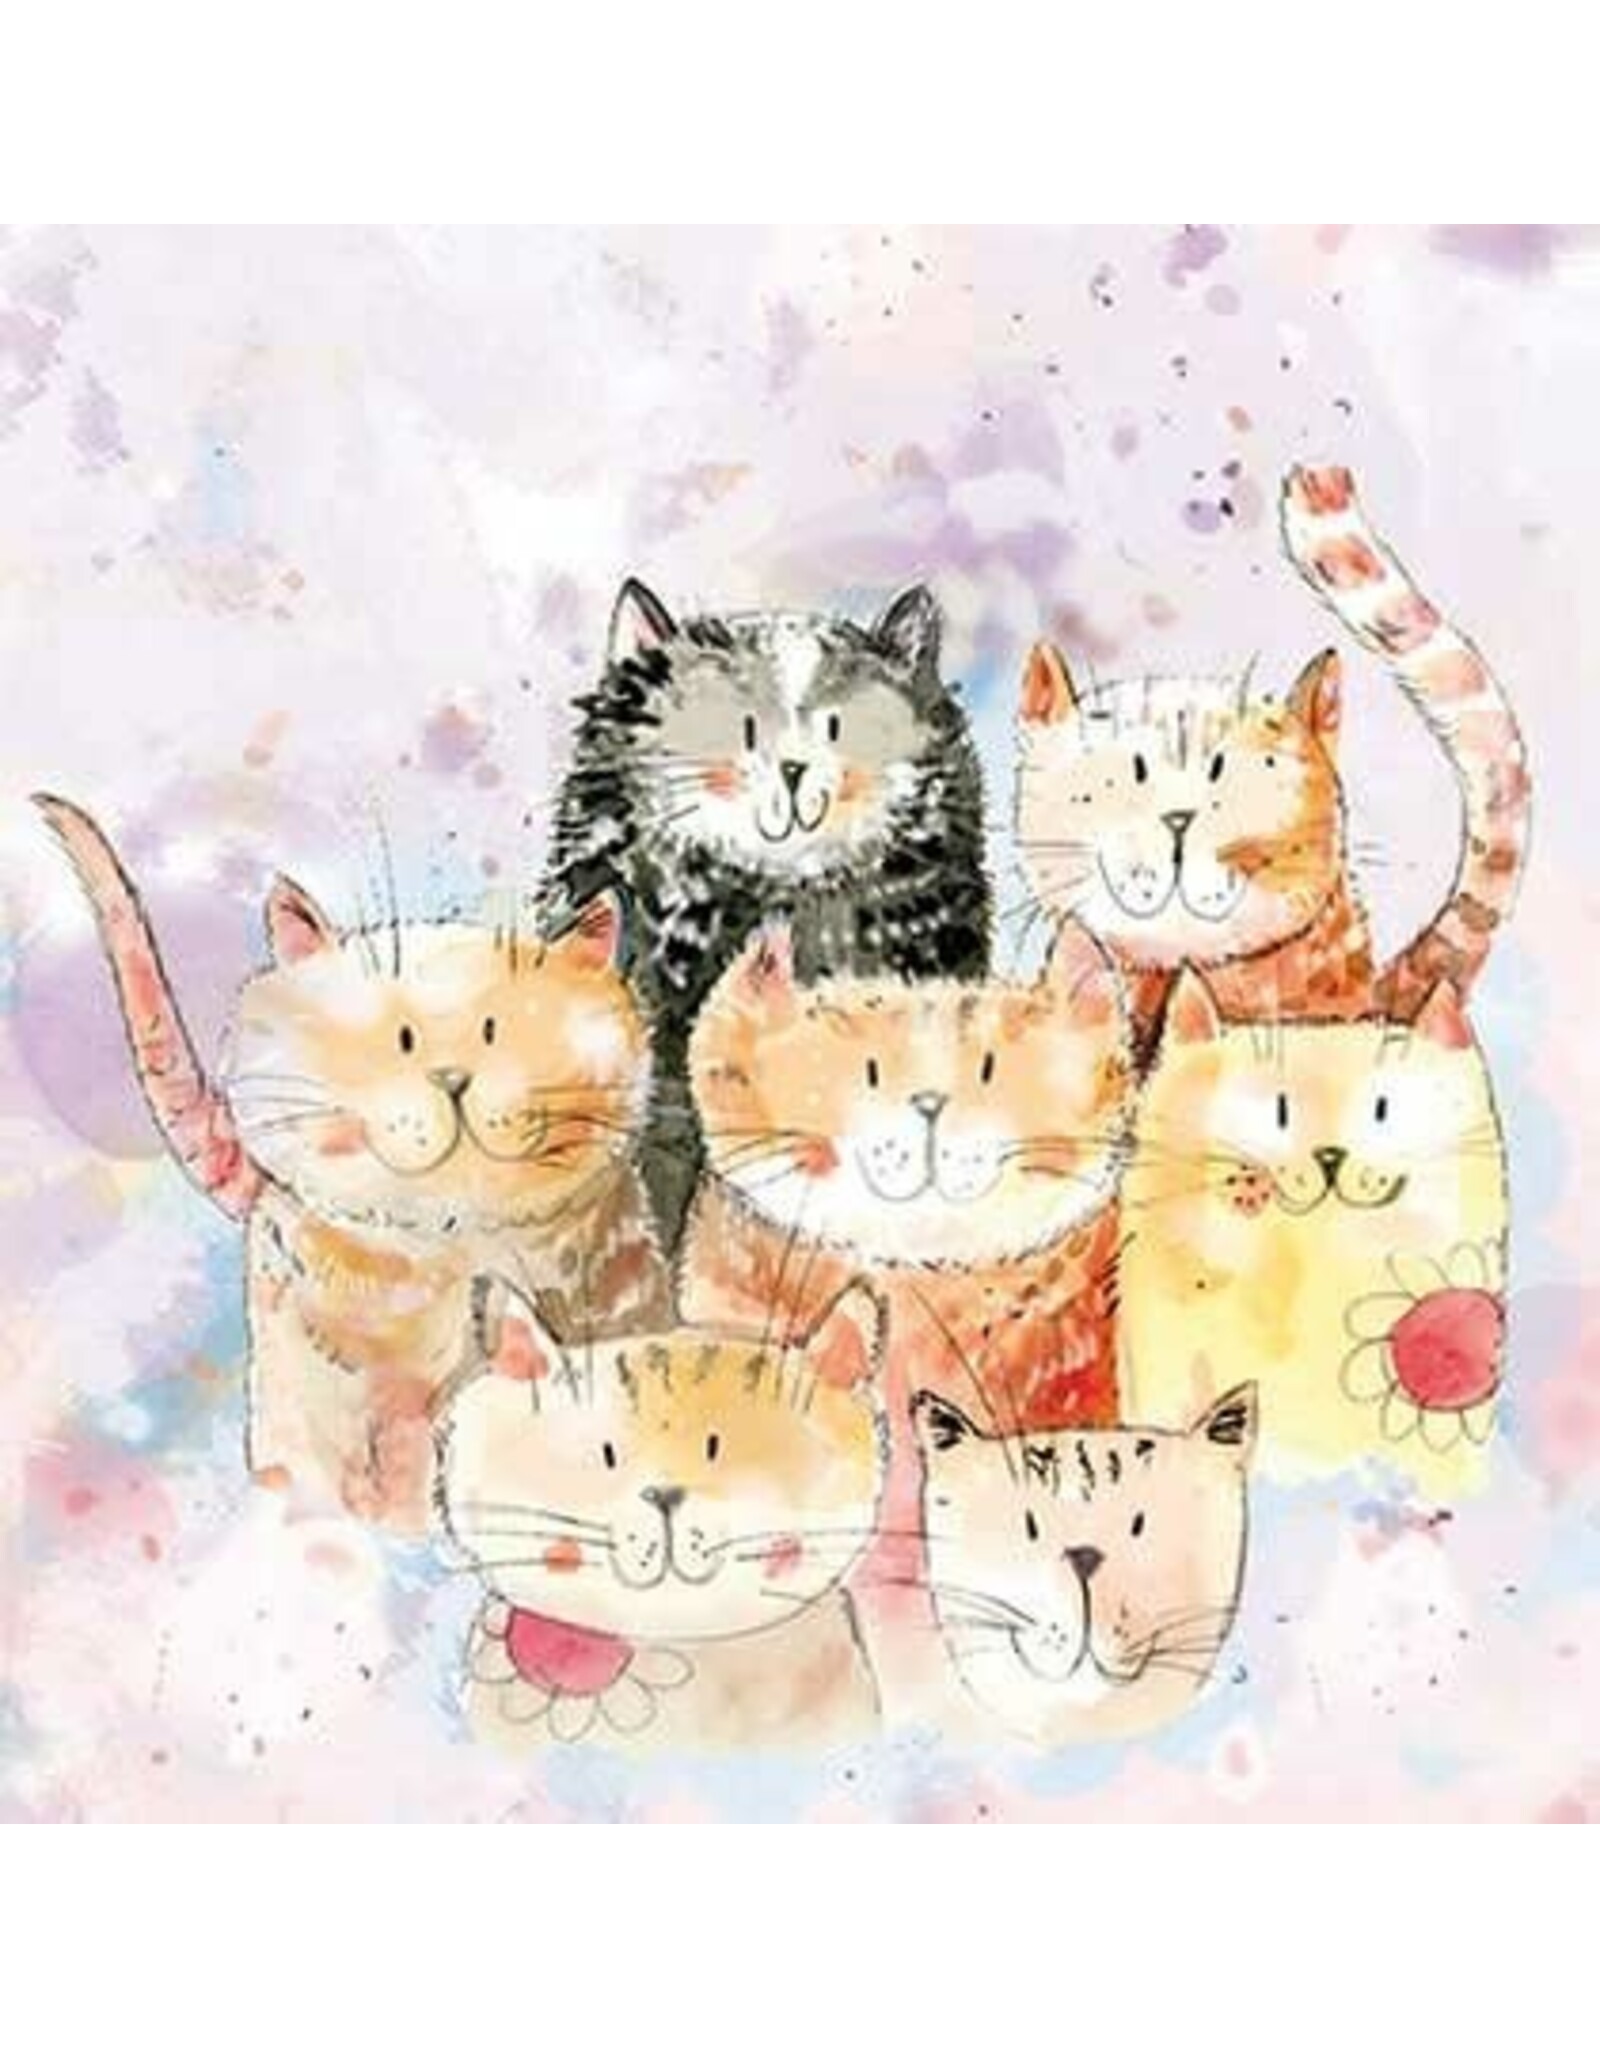 Animal Friends Animal Friends Card "Cats Group"